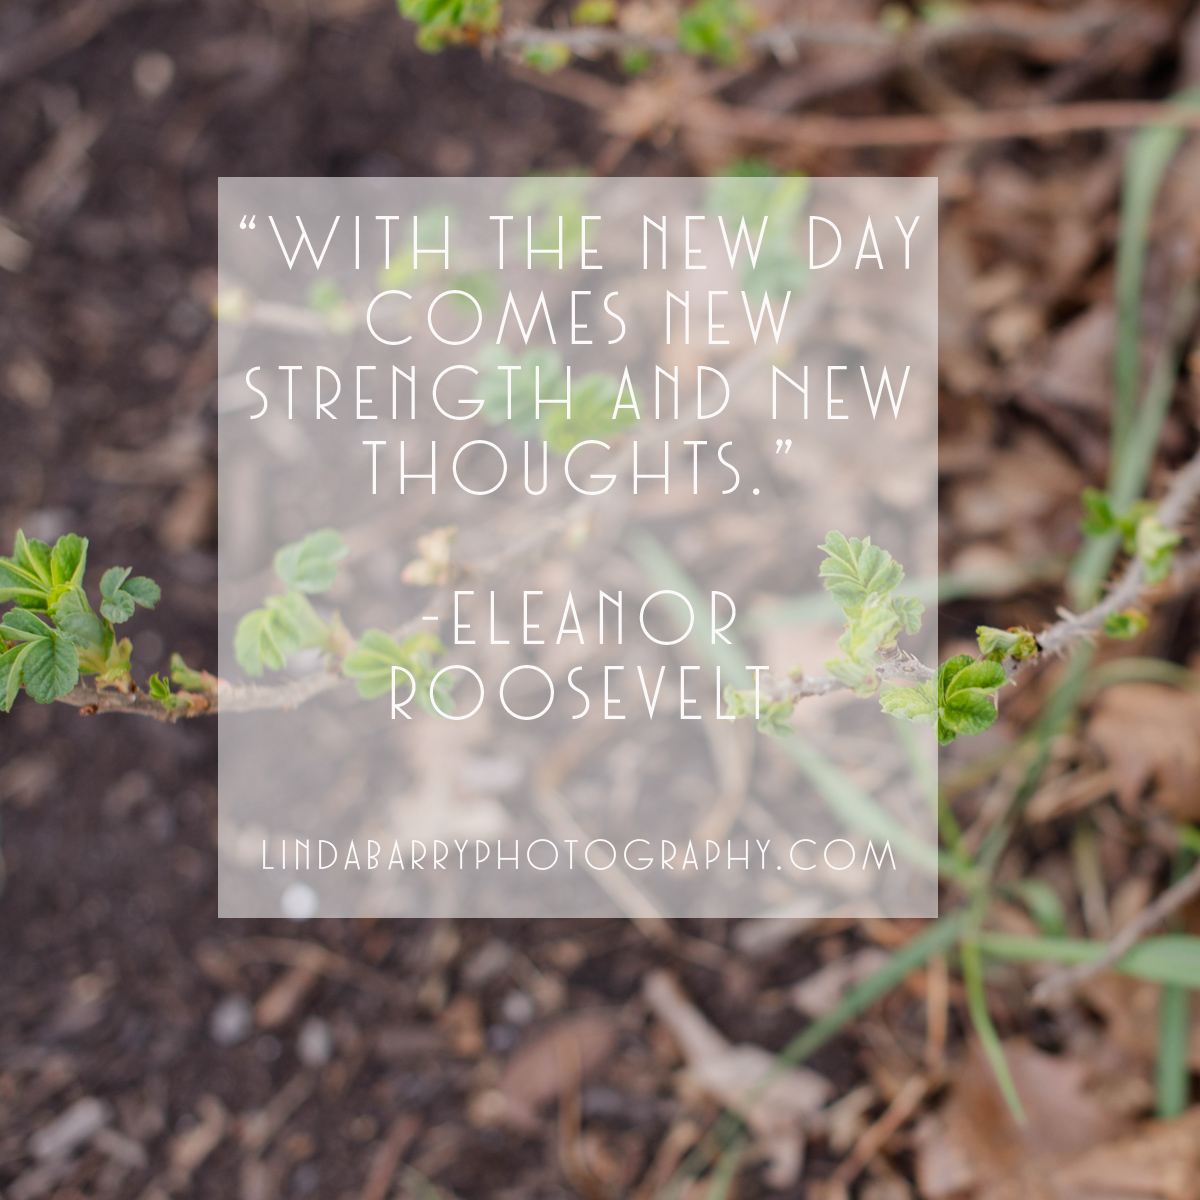 With the new day comes new strength and new thoughts. Inspirational quote by Eleanor Roosevelt.